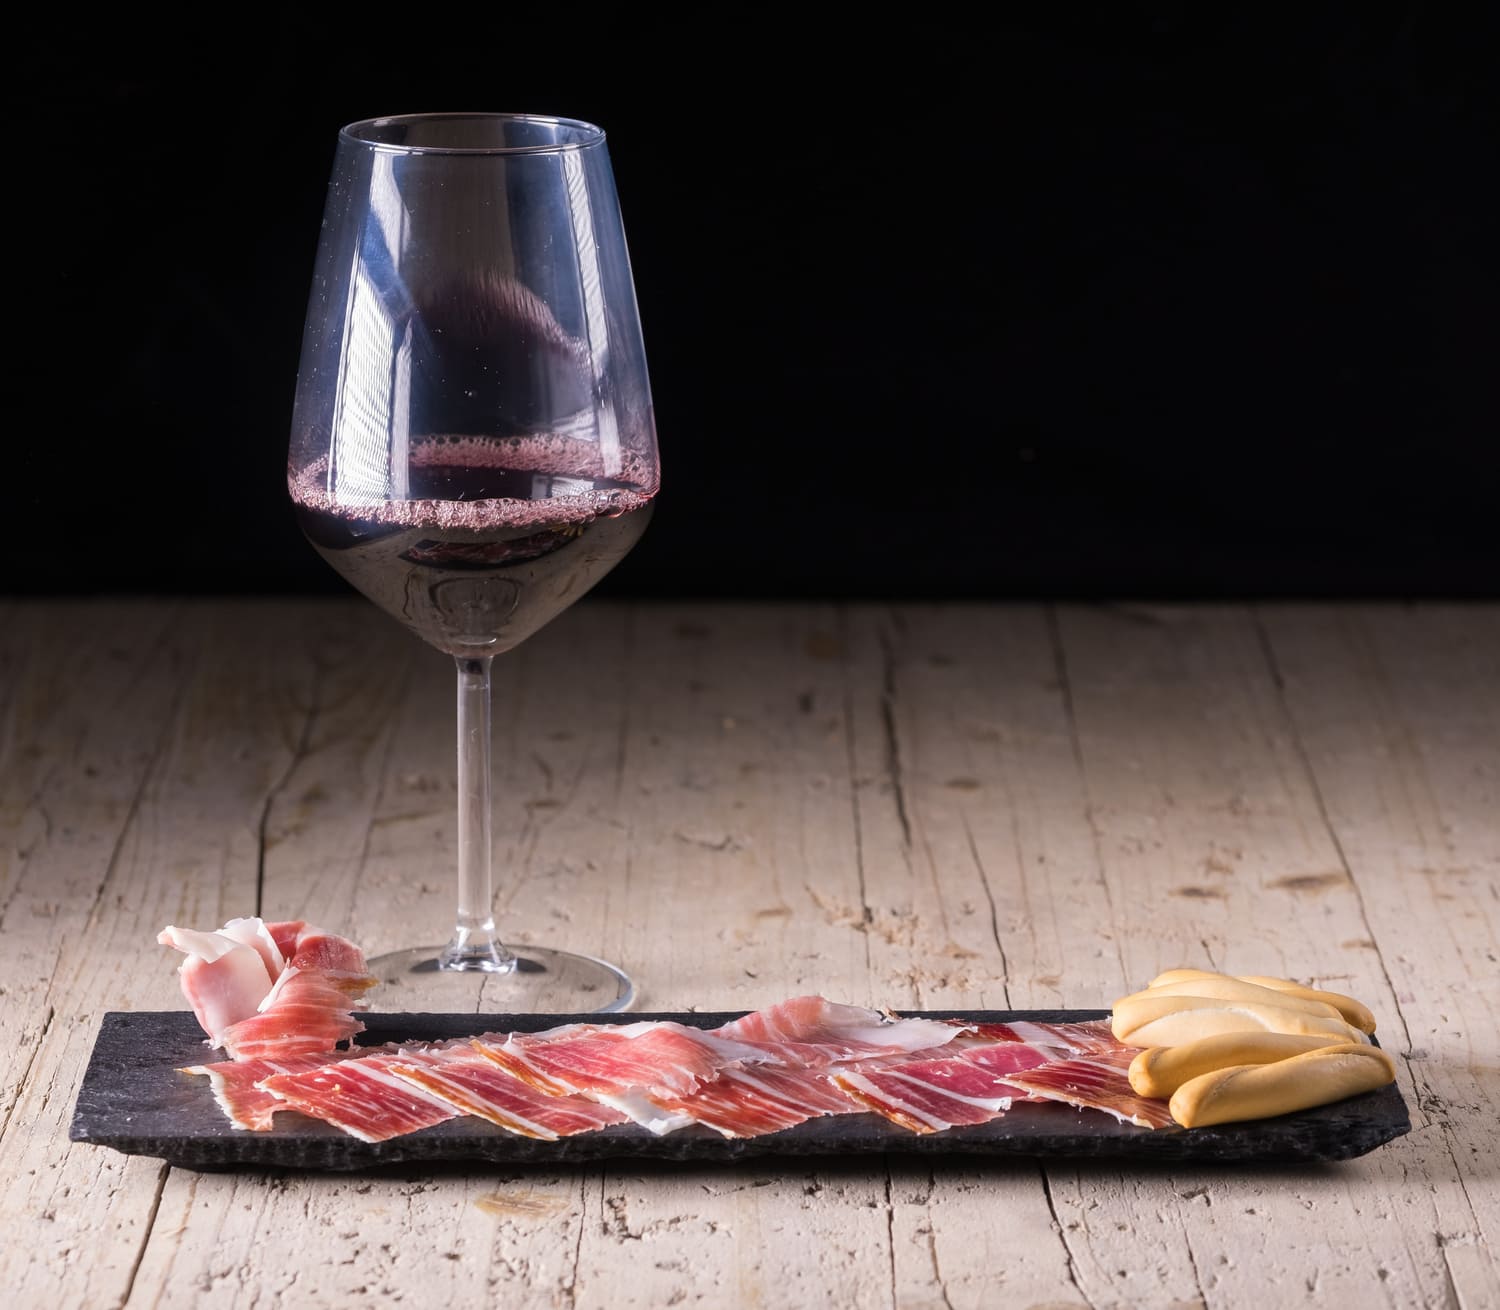 Barcelona TAILOR-MADE wine experience